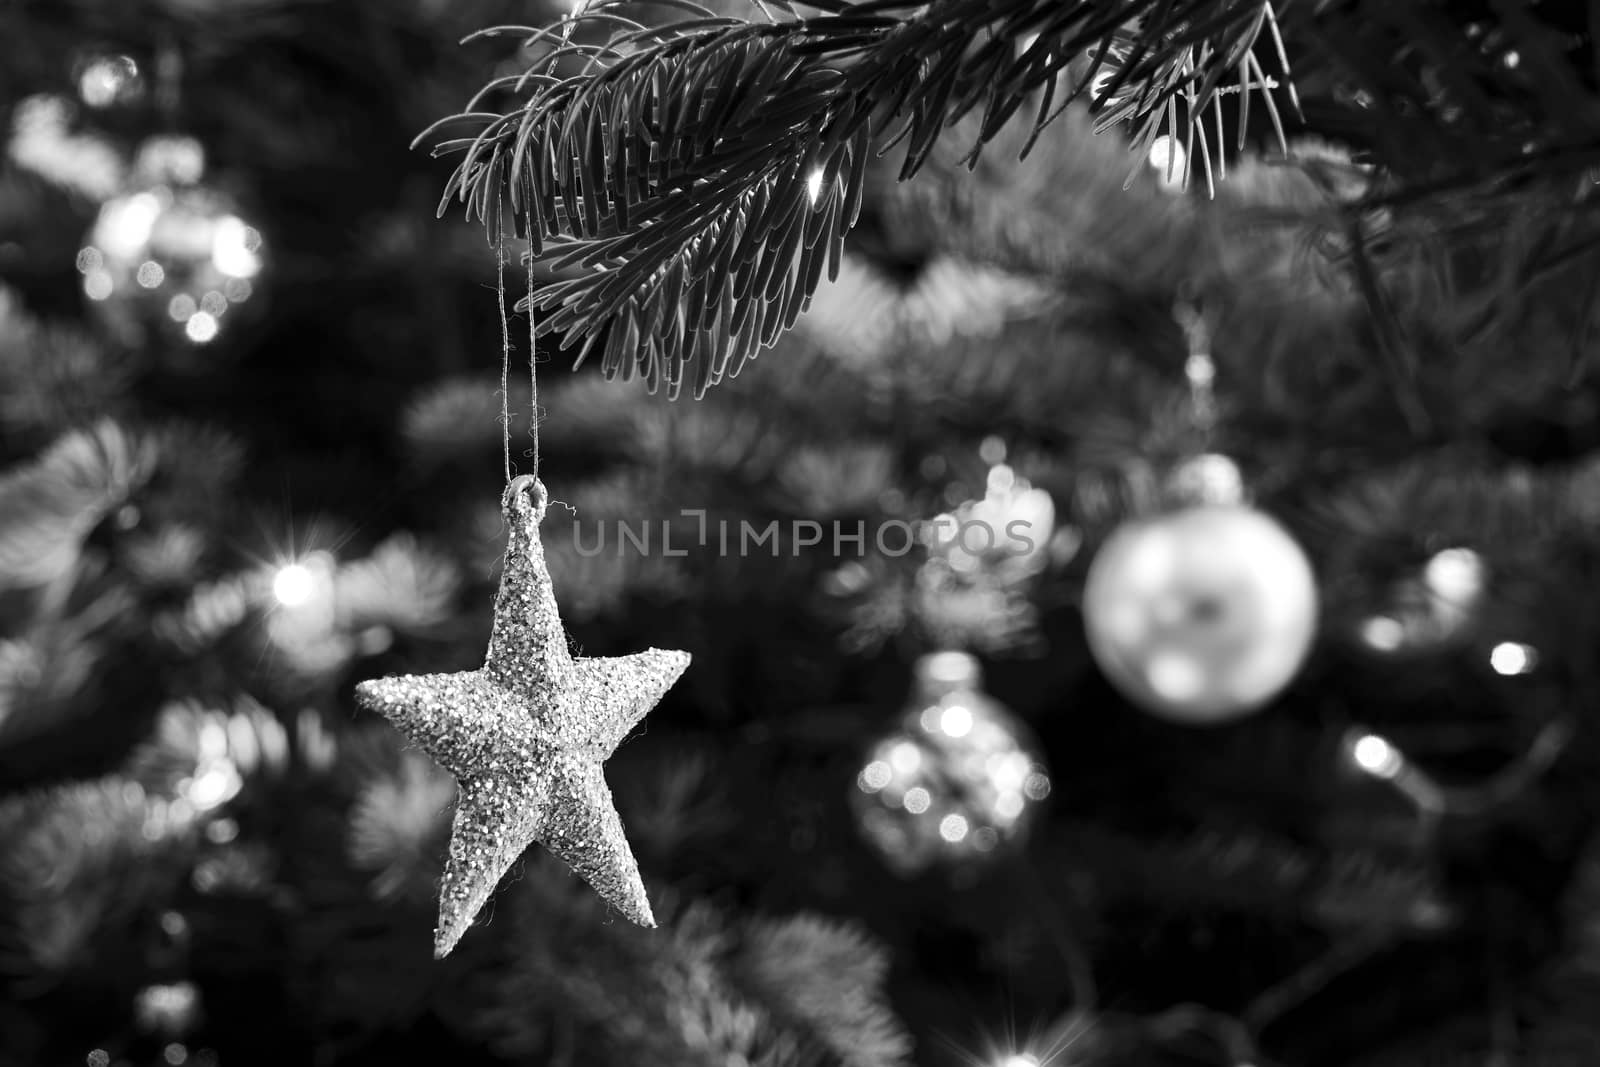 A star-shaped spruce tree decoration during Christmas in Poland, monochrome